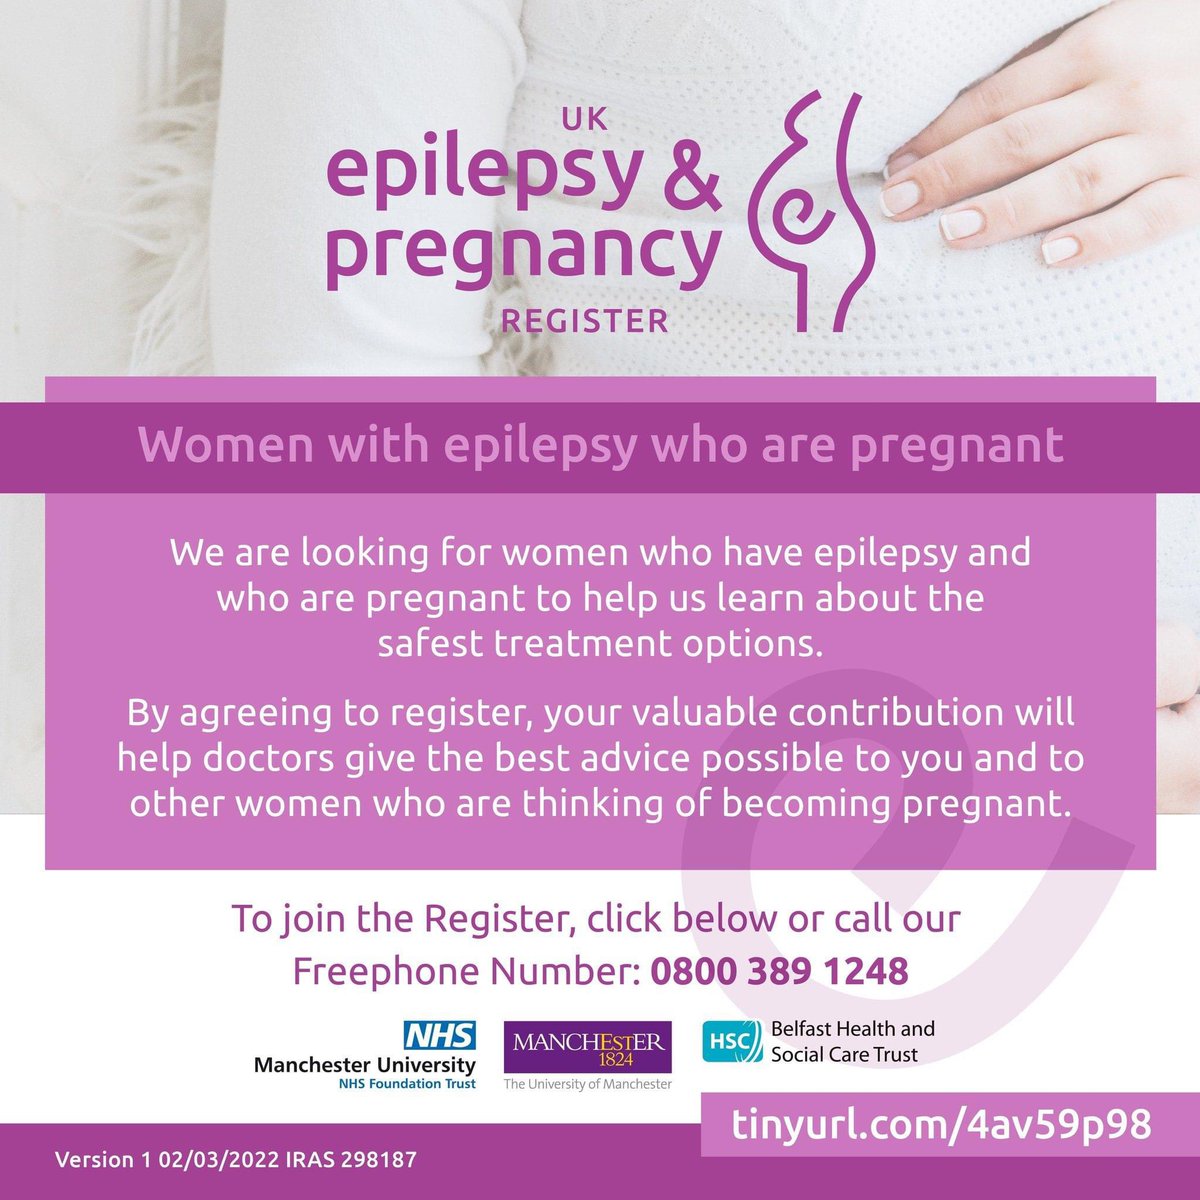 UK Epilepsy & Pregnancy Register is looking for pregnant people with epilepsy to learn about the health and development of children born to mums with epilepsy.

#FetalValproateSpectrumDisorder
#FetalAnticonvulsantSyndrome 

Click here to find out more: qualtrics.manchester.ac.uk/jfe/form/SV_3X…